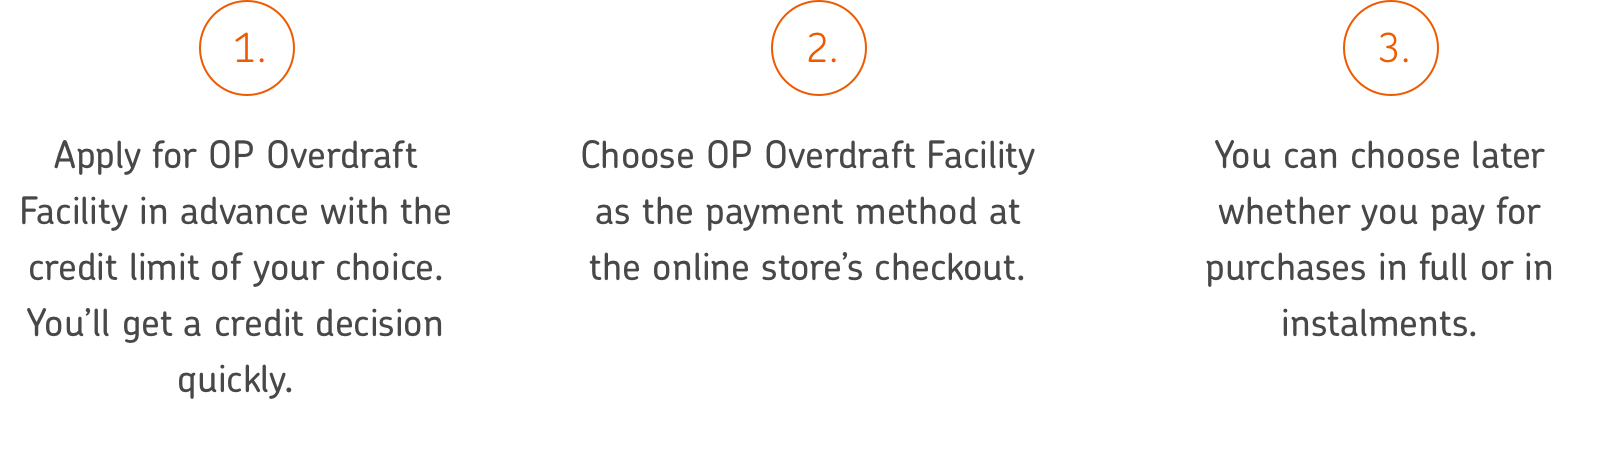 1. Apply for OP Overdraft Facility in advance with the credit limit of your choice. You’ll get a credit decision quickly. 2. Choose OP Overdraft Facility as the payment method at the online store’s checkout. 3. You can choose later whether you pay for purchases in full or in instalments.